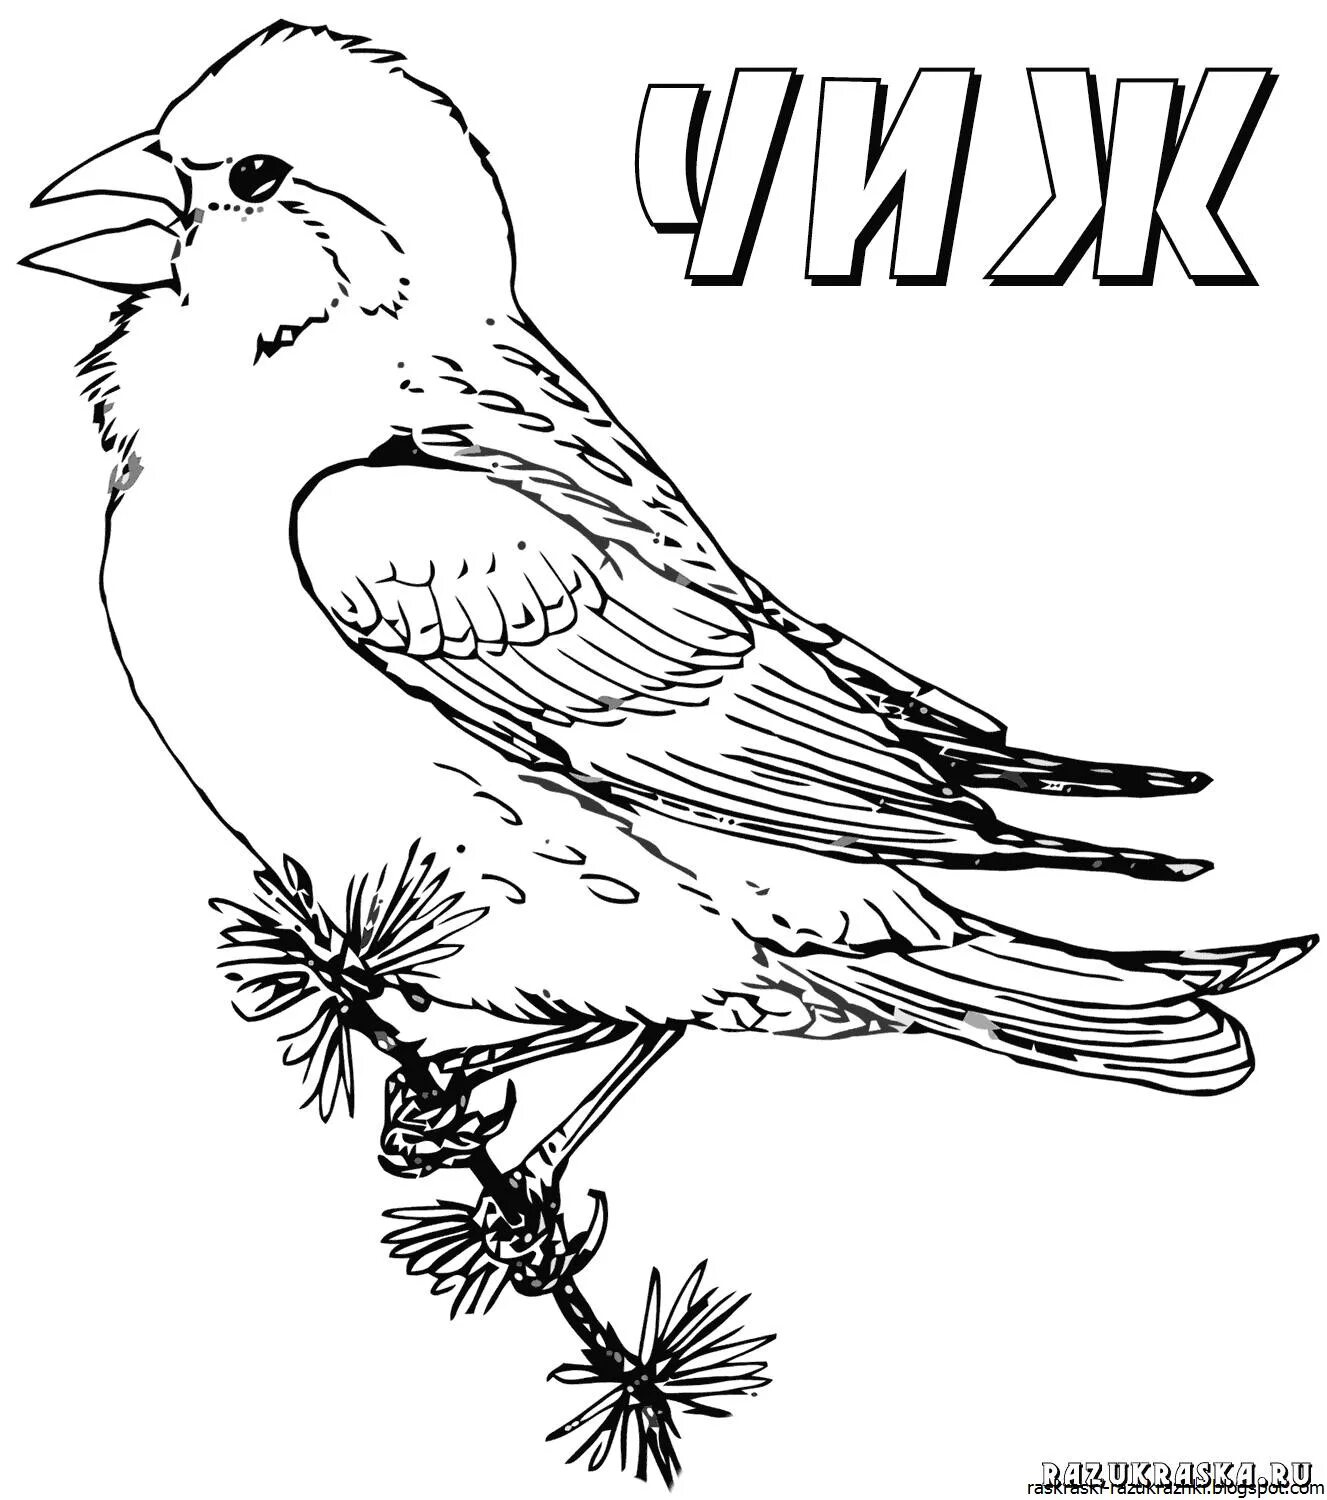 Coloring pages playful wintering birds for kids